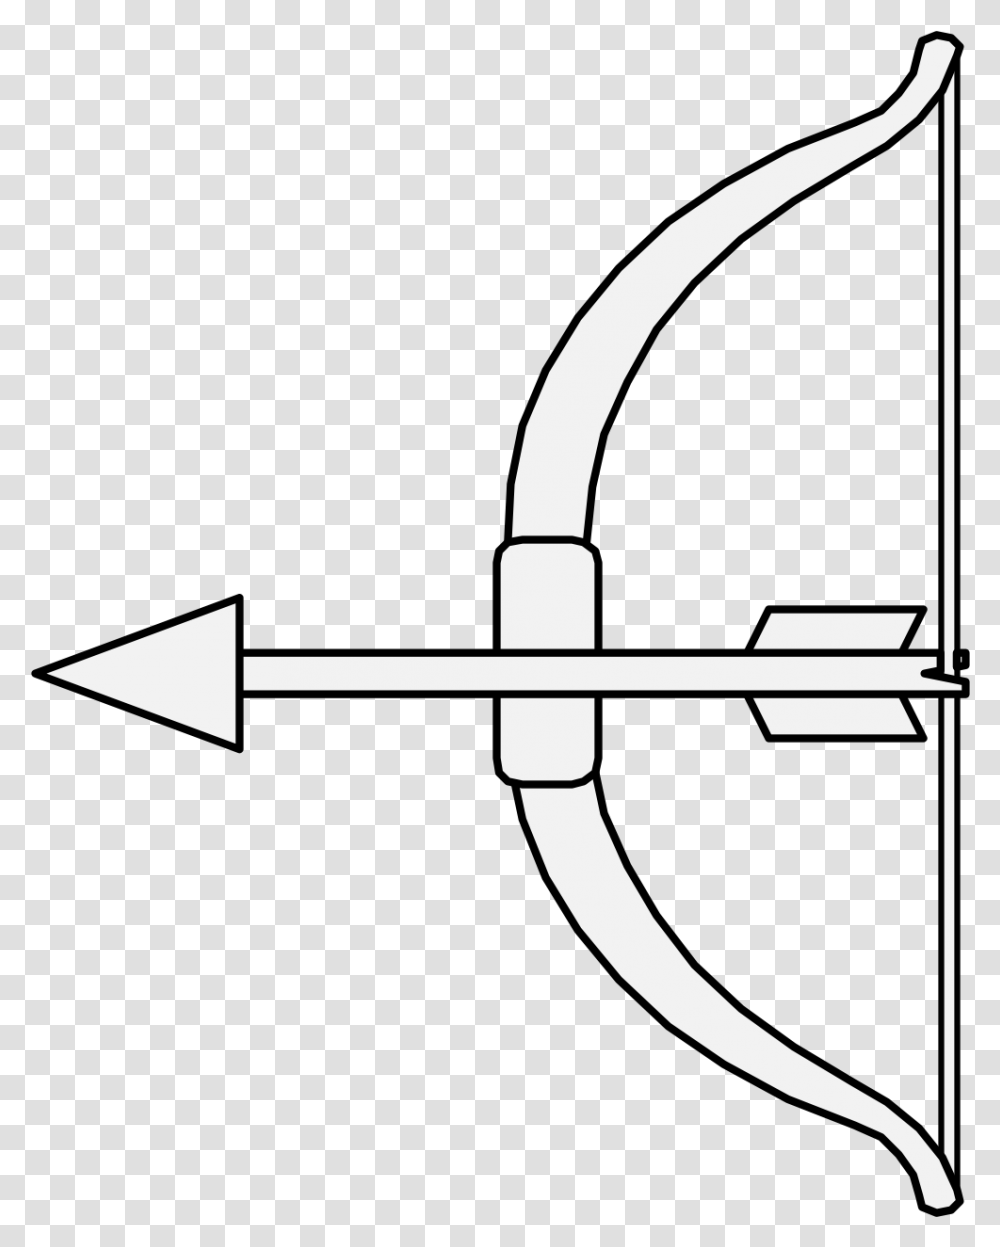 Bow With An Arrow Nocked Line Art, Archery, Sport, Sports Transparent Png